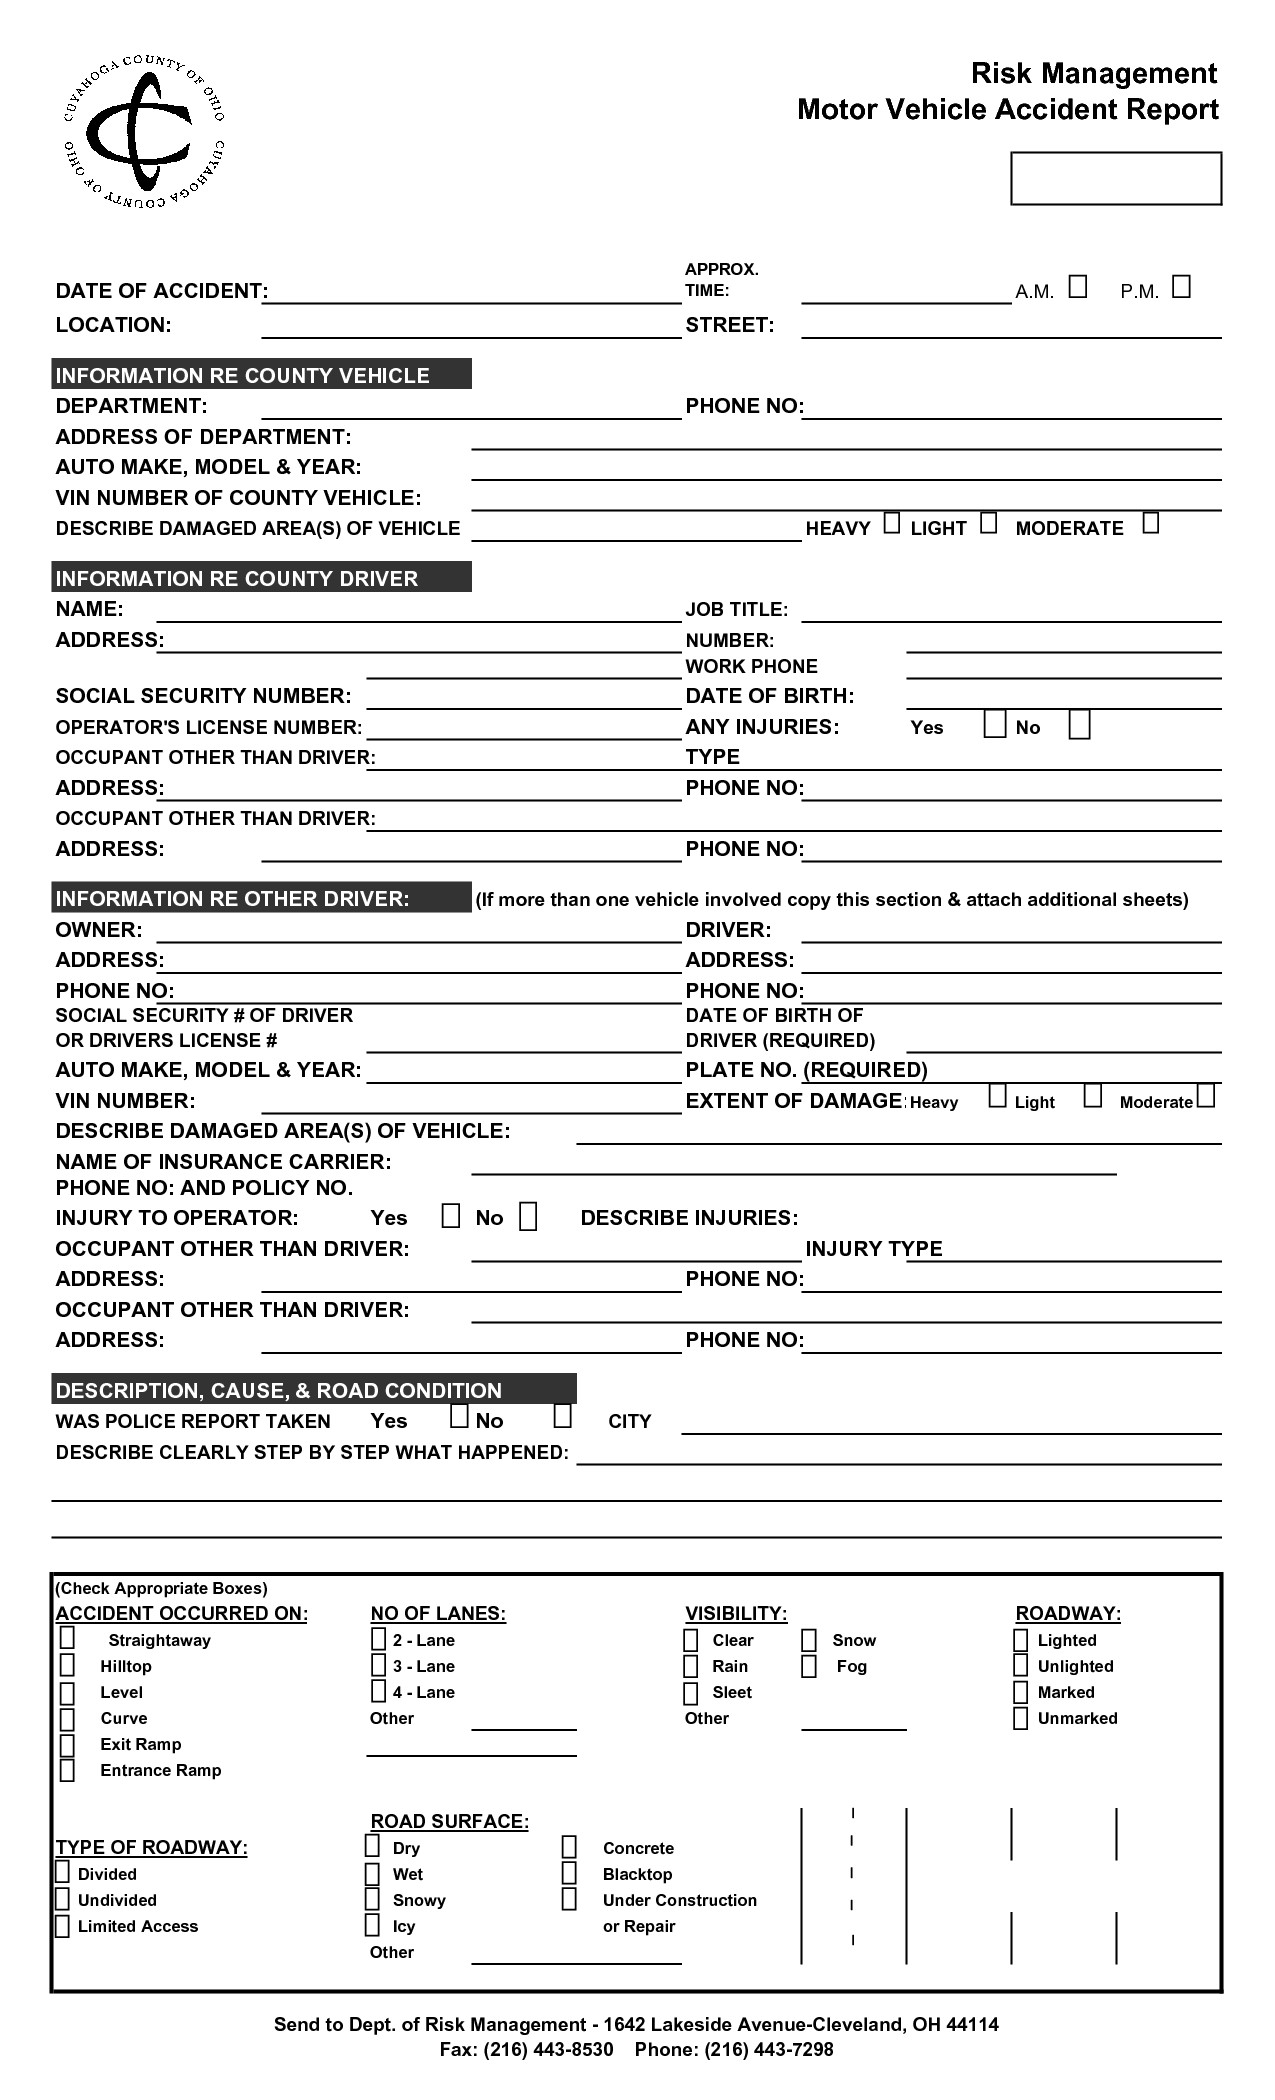 Vehicle Accident Report form Template Tario Motor Vehicle Accident Report Impremedia